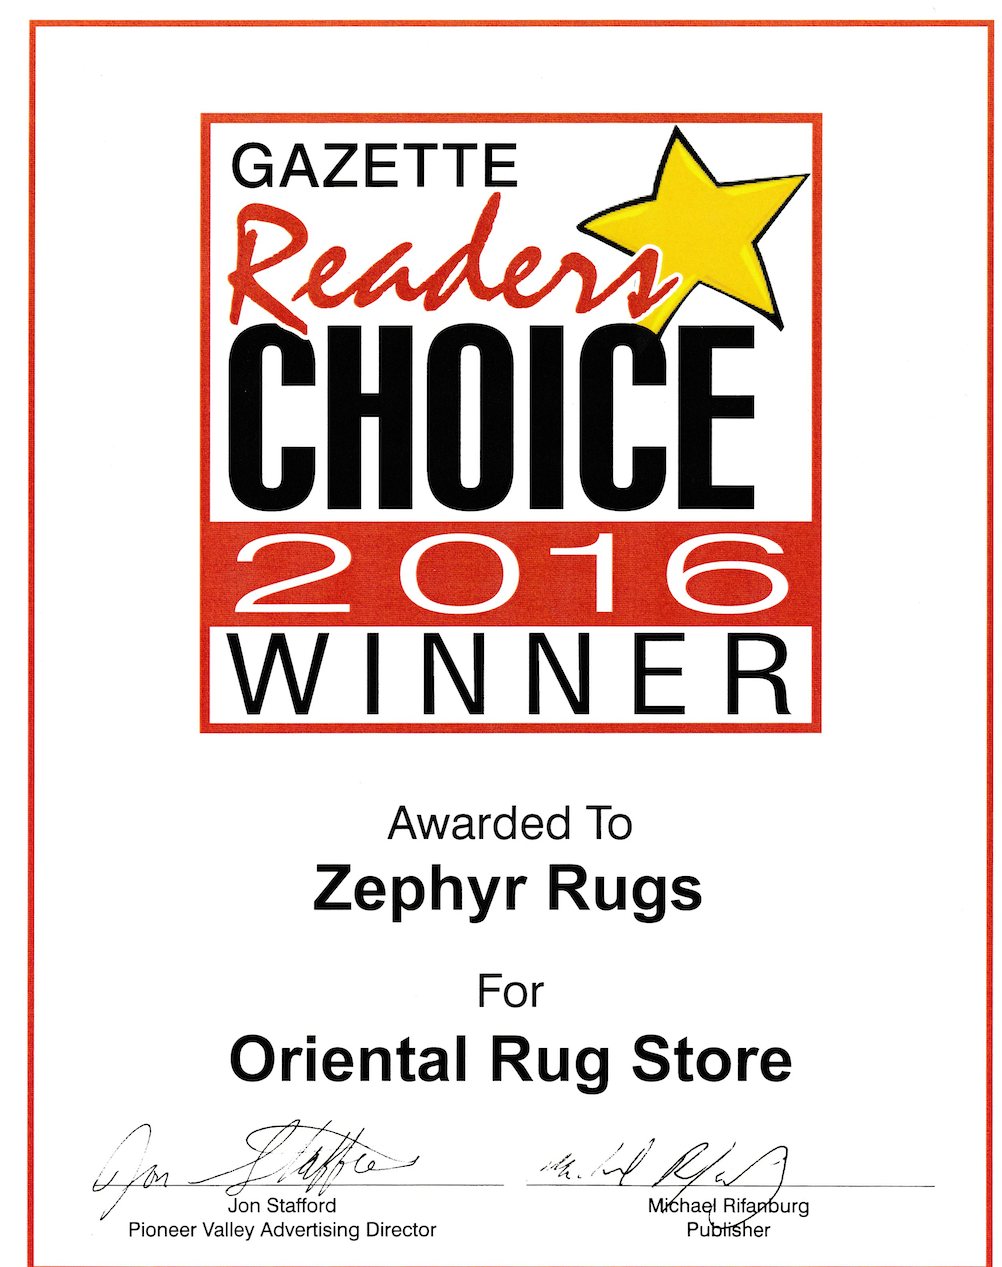 Zephyr Rugs Voted Best Oriental Rug Store by Hampshire Gazette Reader's Choice 2016